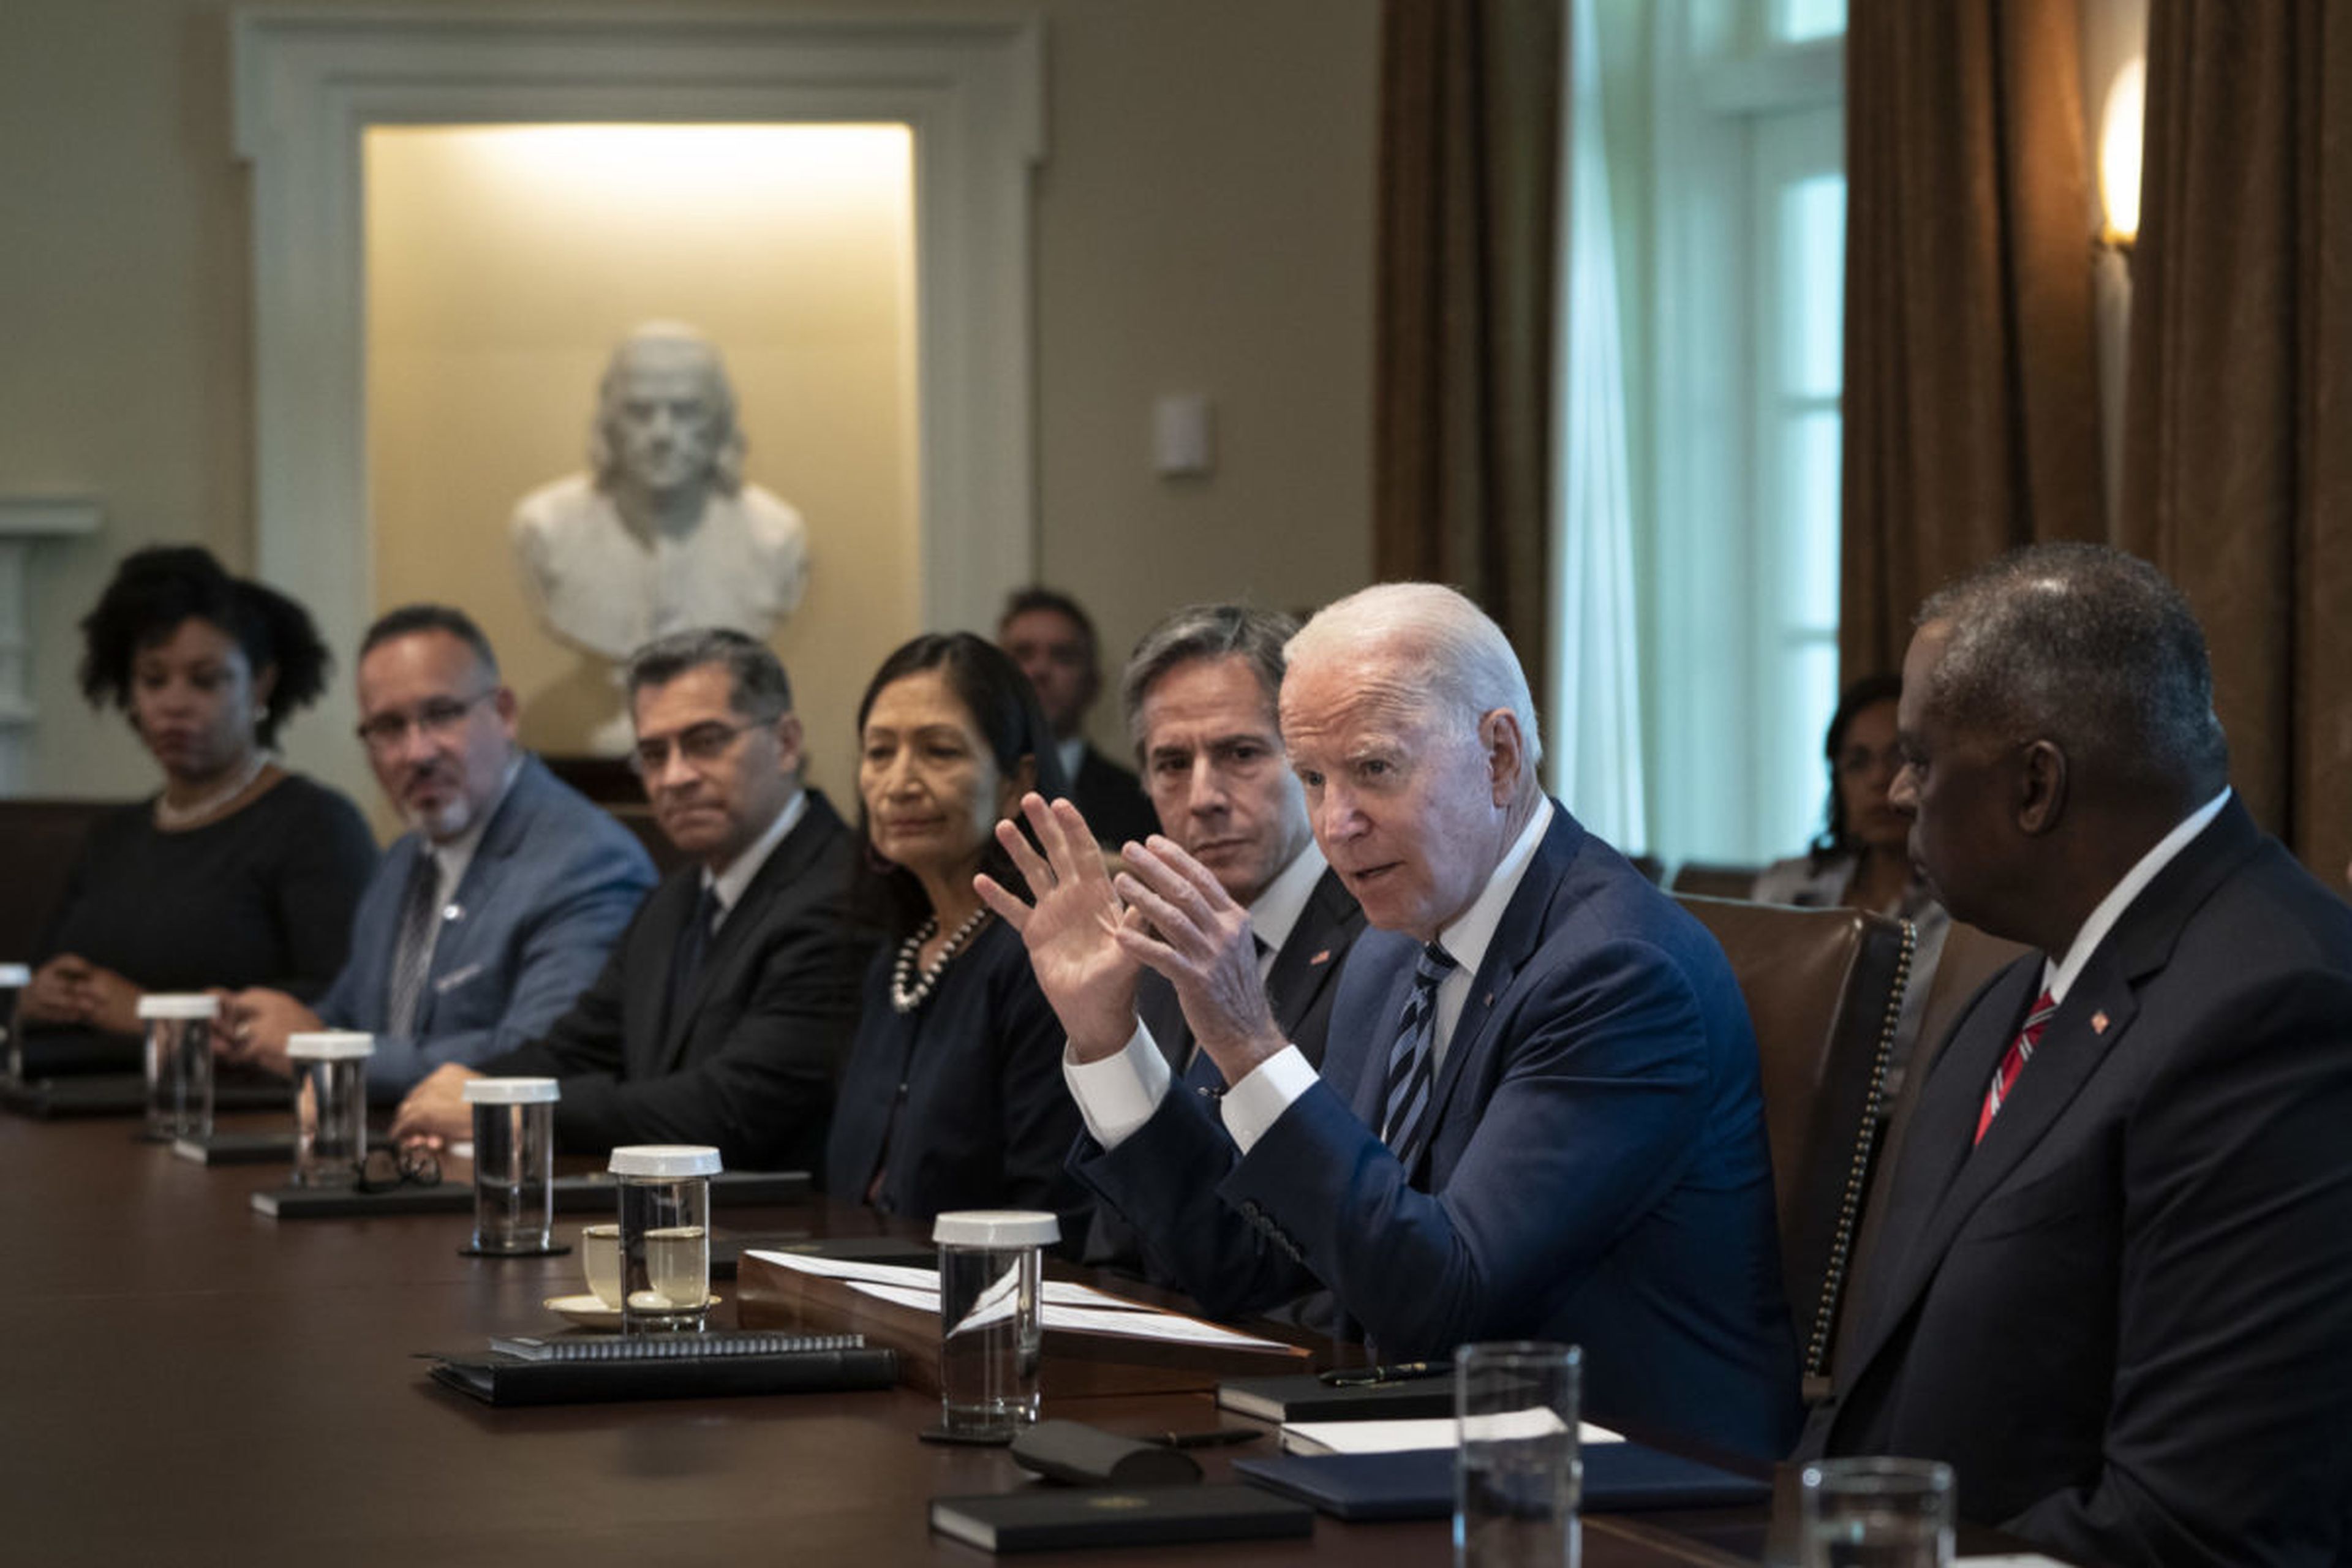 President Joe Biden speaks at the start of a meeting in the Cabinet Room of the White House on July 20, 2021, in Washington. The Cybersecurity and Infrastructure Security Agency is preparing to release a technical roadmap for agencies to implement President Biden&#8217;s Zero Trust cybersecurity mandates. (Photo by Drew Angerer/Getty Images)